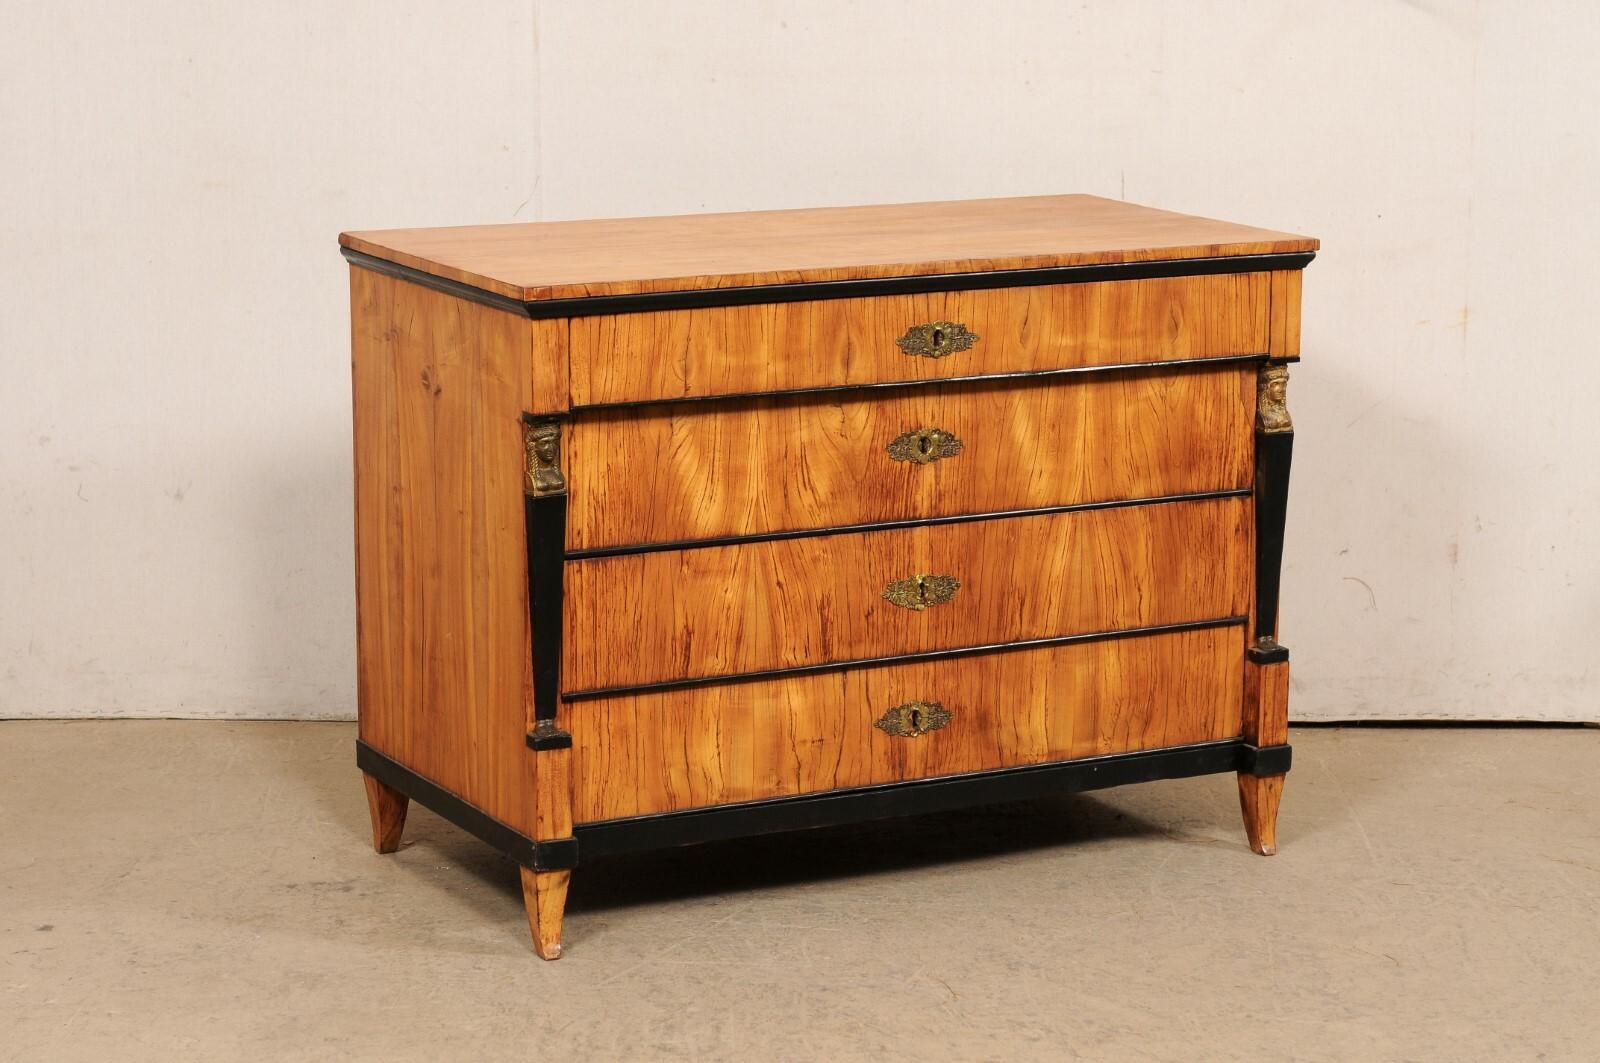 An Italian Neoclassical chest, with black accents and and unusual feet, from the early 19th century. This antique chest of drawers from Italy features a rectangular-shaped top above a case which houses four drawers flanked within Roman column-style